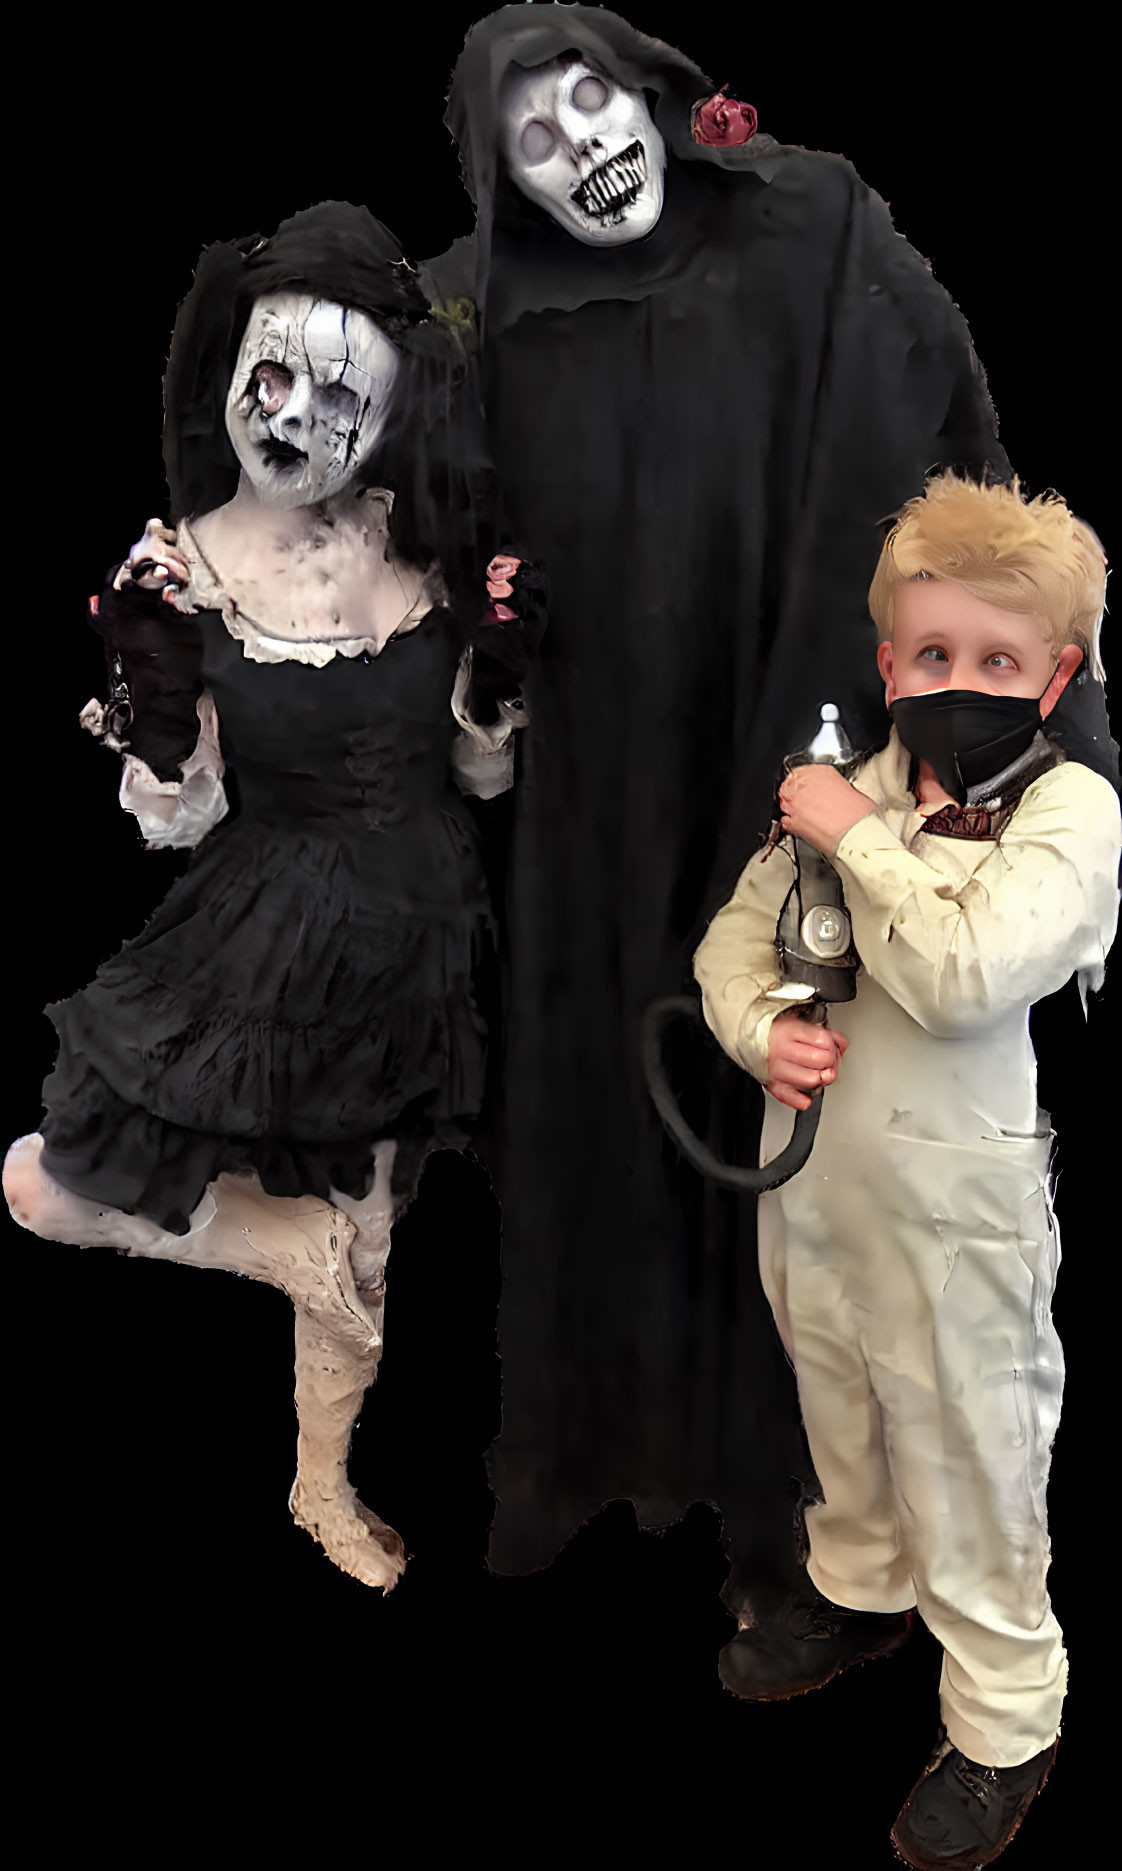 Two Halloween costumes: ghostly figure in black robe with skull mask, doll in black dress, child